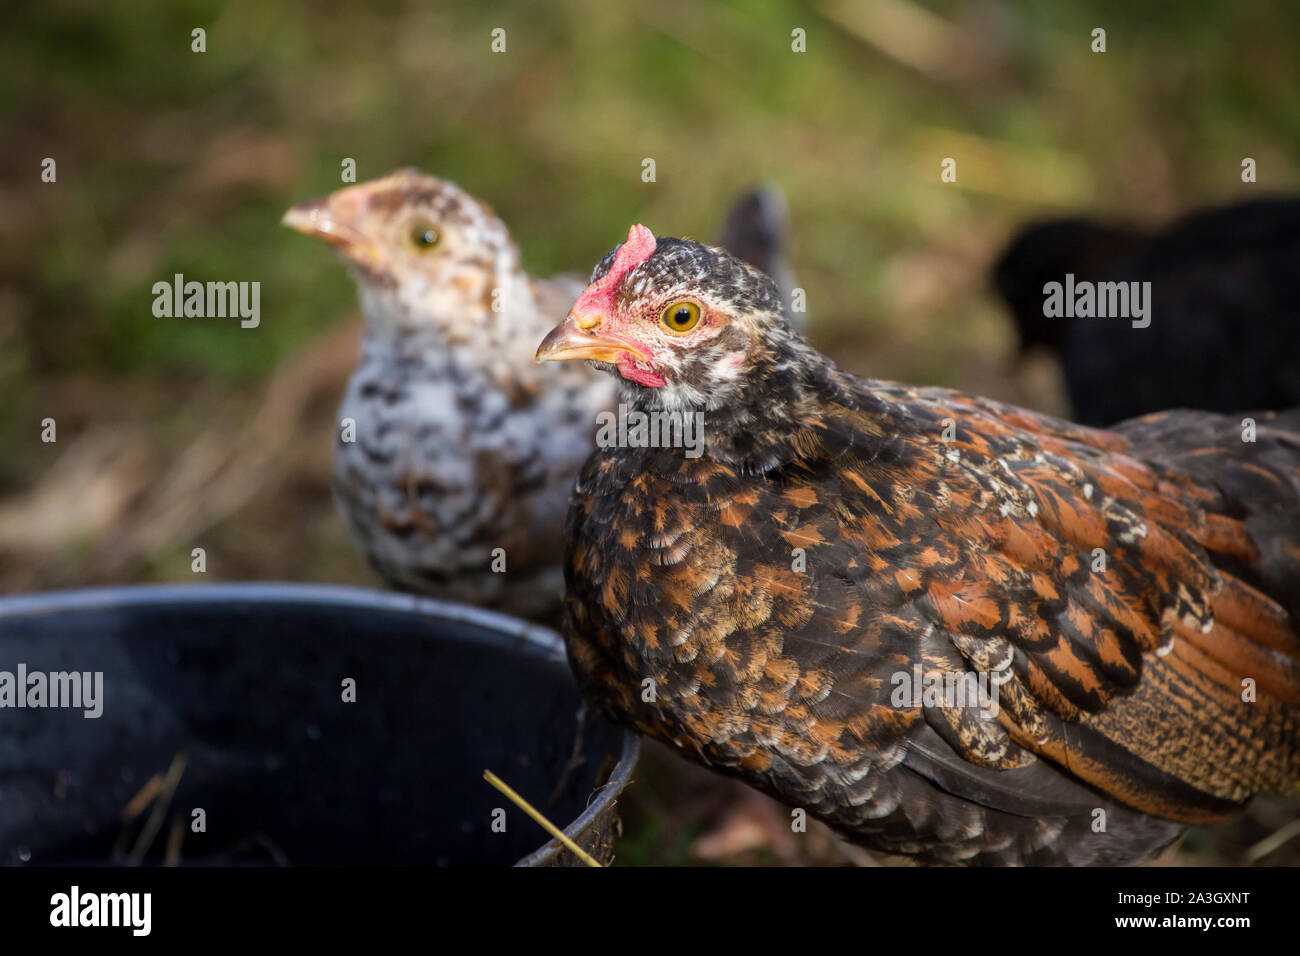 Two young chicken drinking water - Stoapiperl / Steinhendl, an endangered chicken breed from Austria Stock Photo